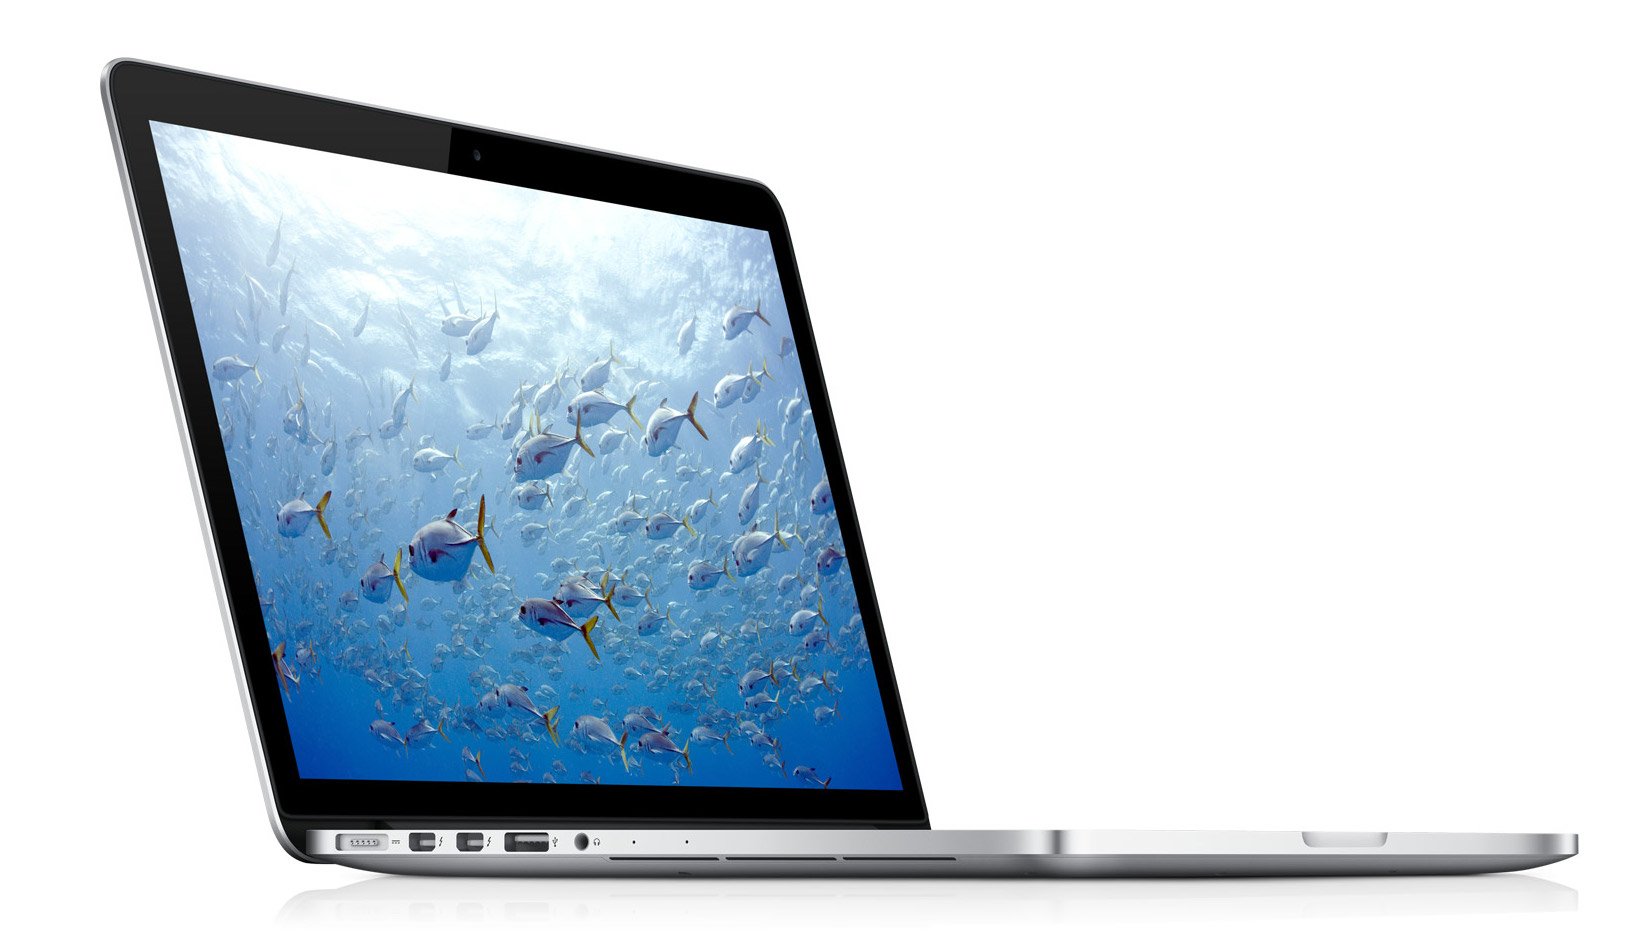 We could see a new MacBook Pro update for 2013 with Haswell processors and better battery life in October.